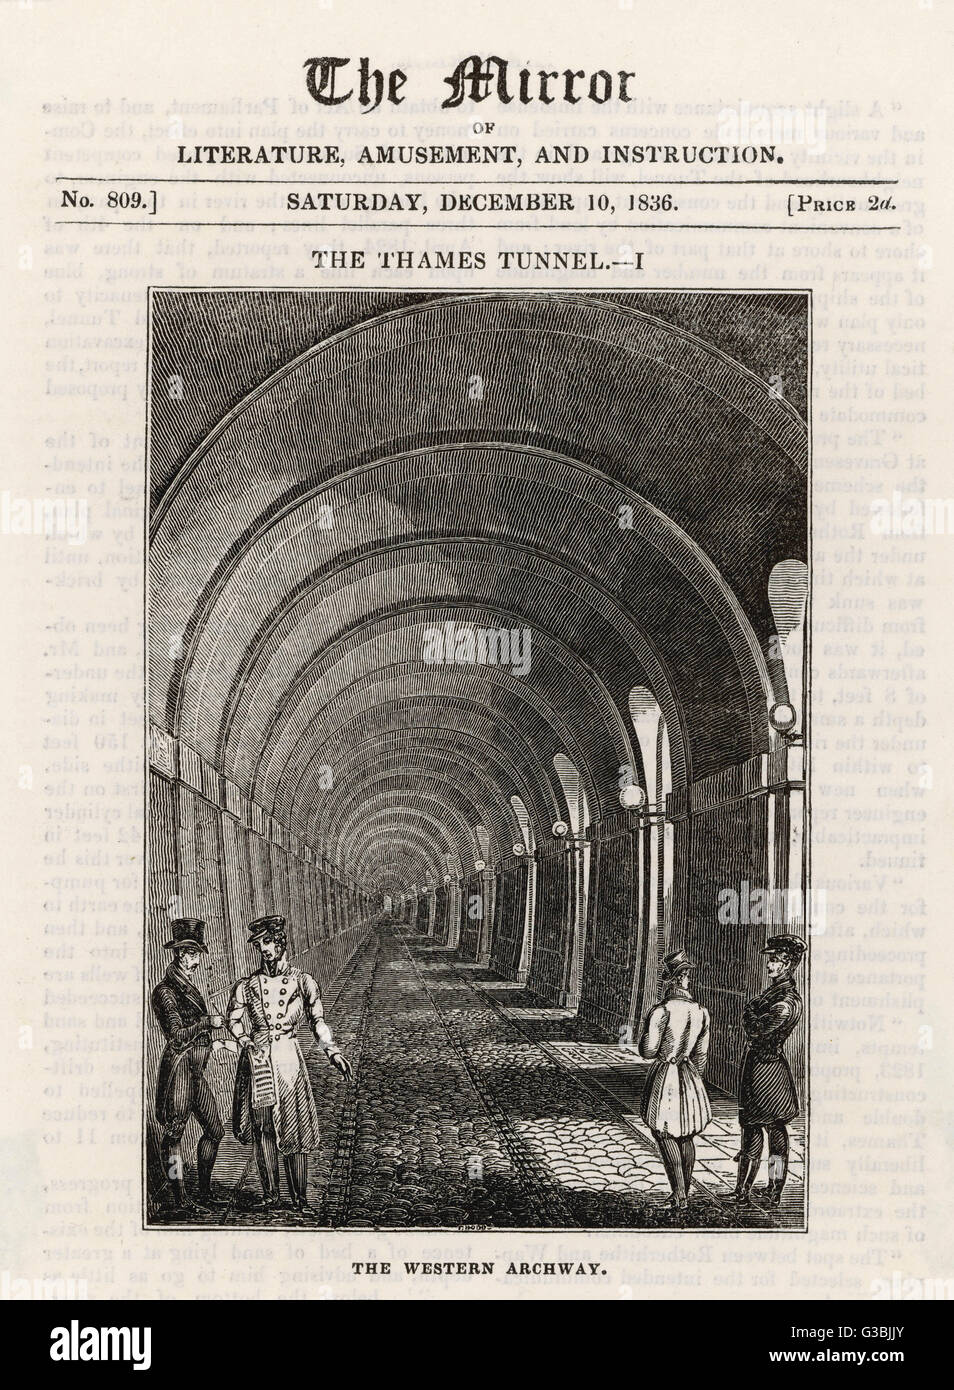 La Thames tunnel à Rotherhithe ; Western arcade. Date : 1836 Banque D'Images